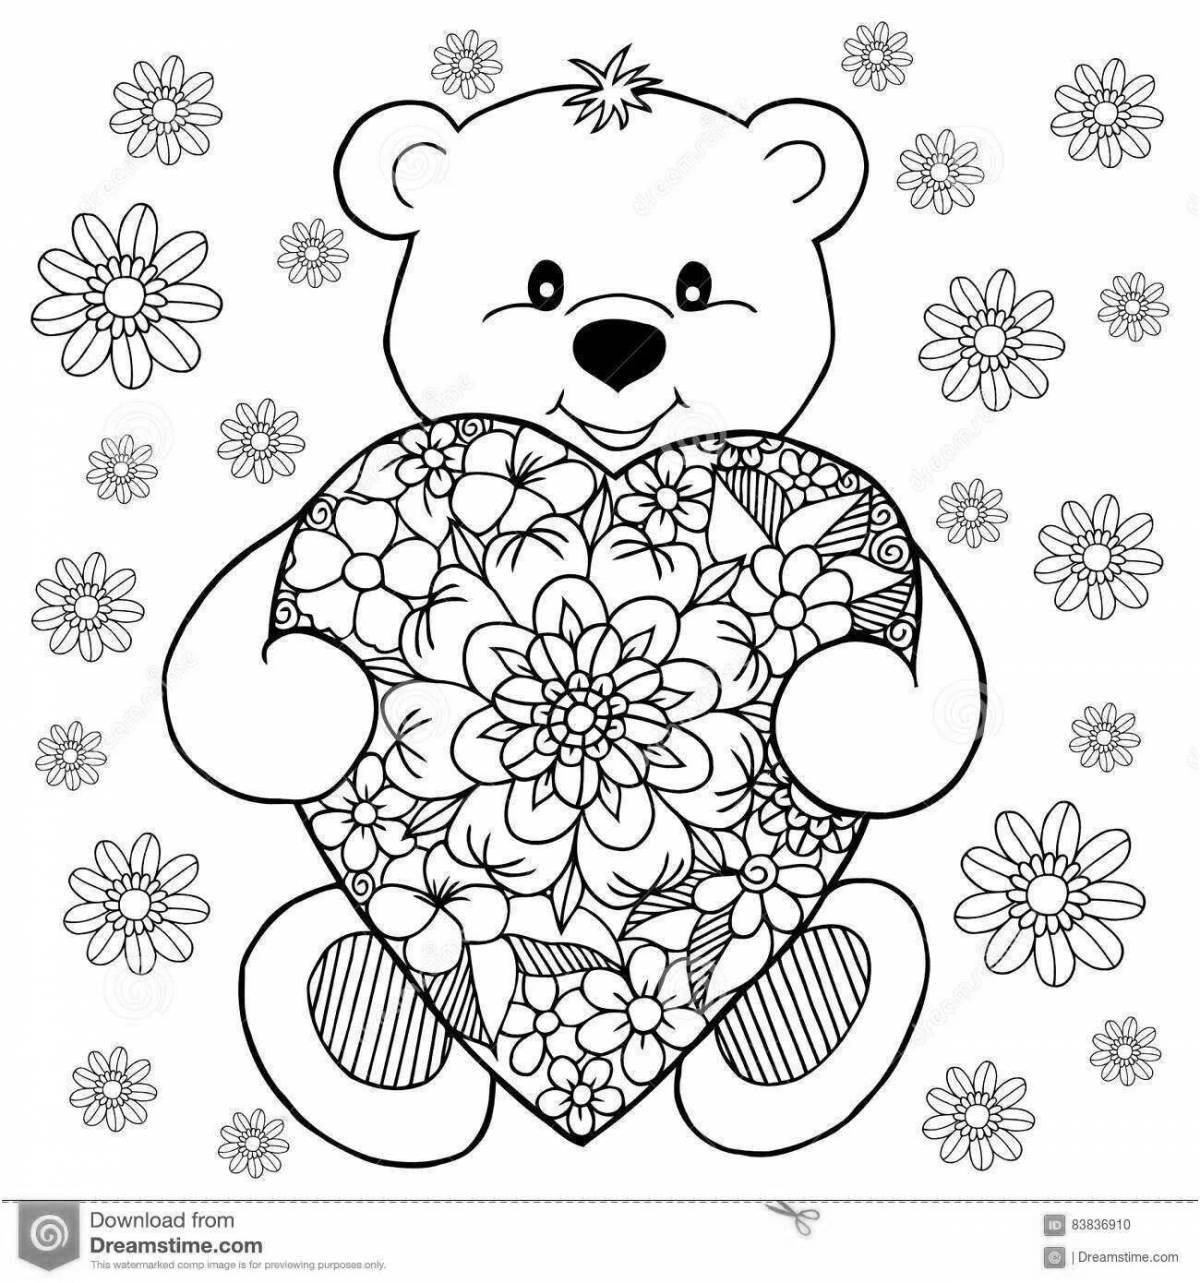 Attractive teddy bear with heart coloring book